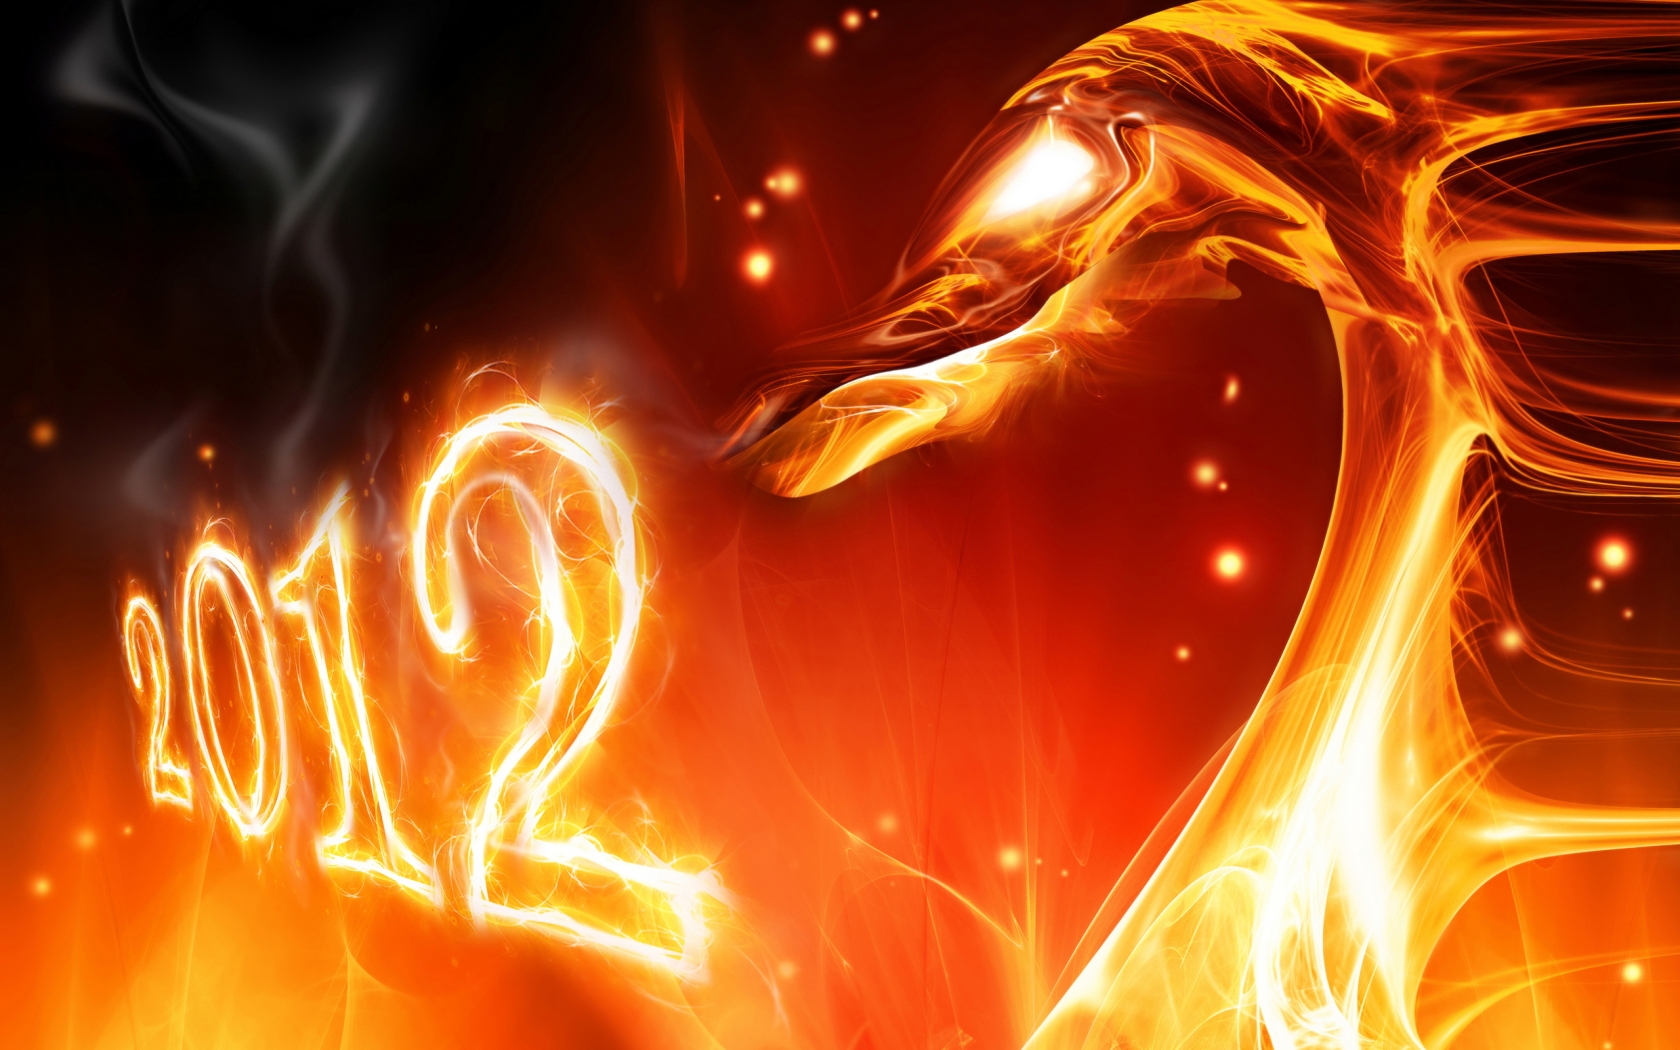 2012 Dragon Year for 1680 x 1050 widescreen resolution